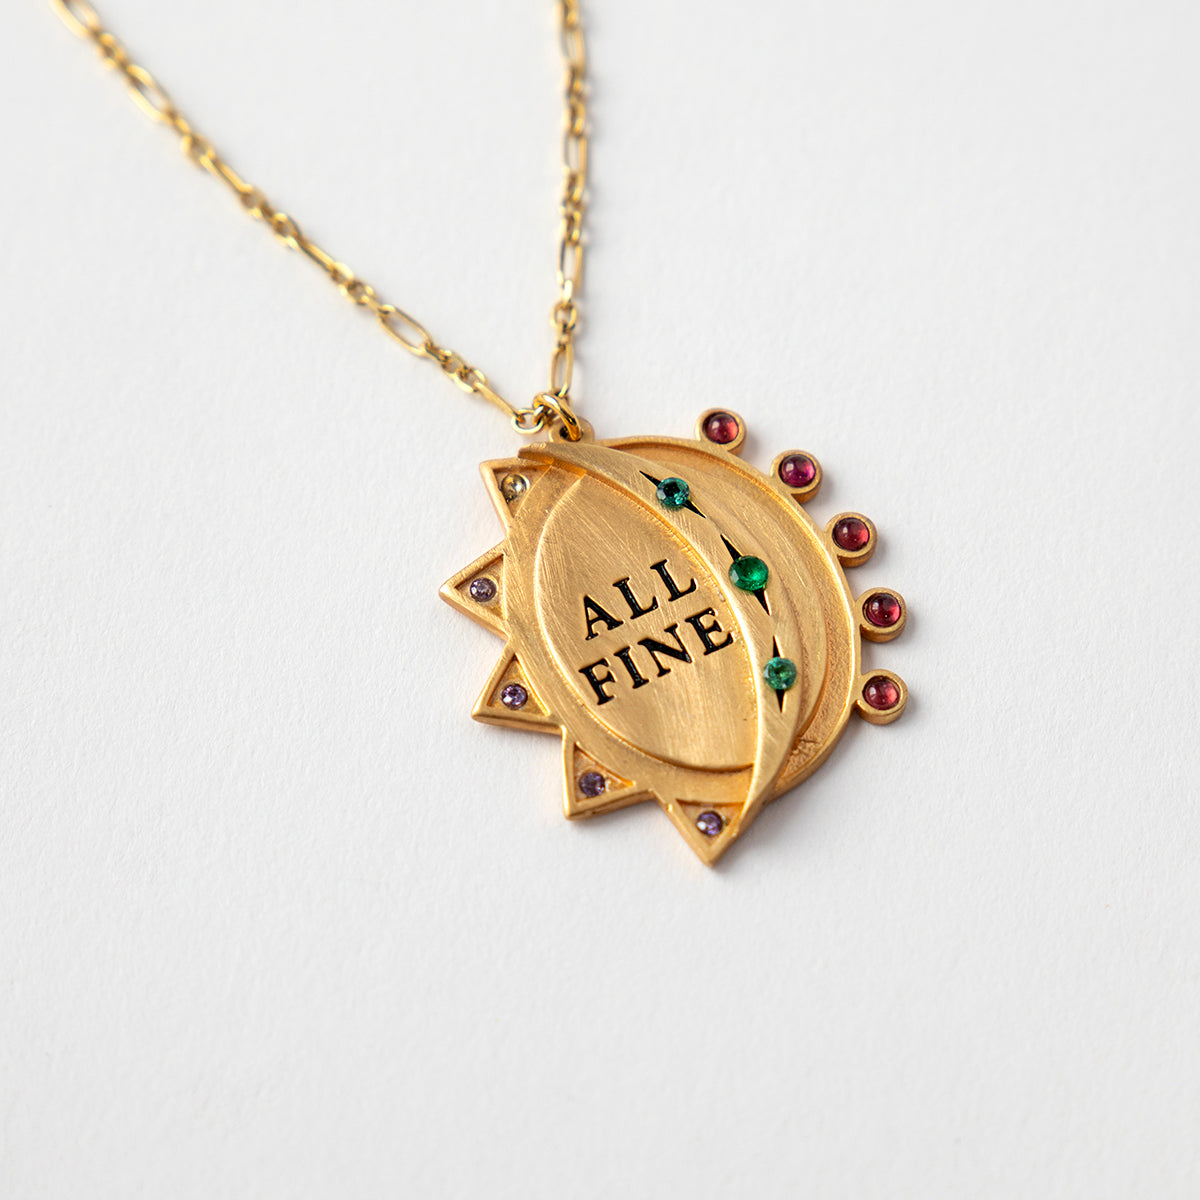 Katerina psoma good luck charm pendant engraved gold plated brass and 925 silver and semiprecious carnelian detail